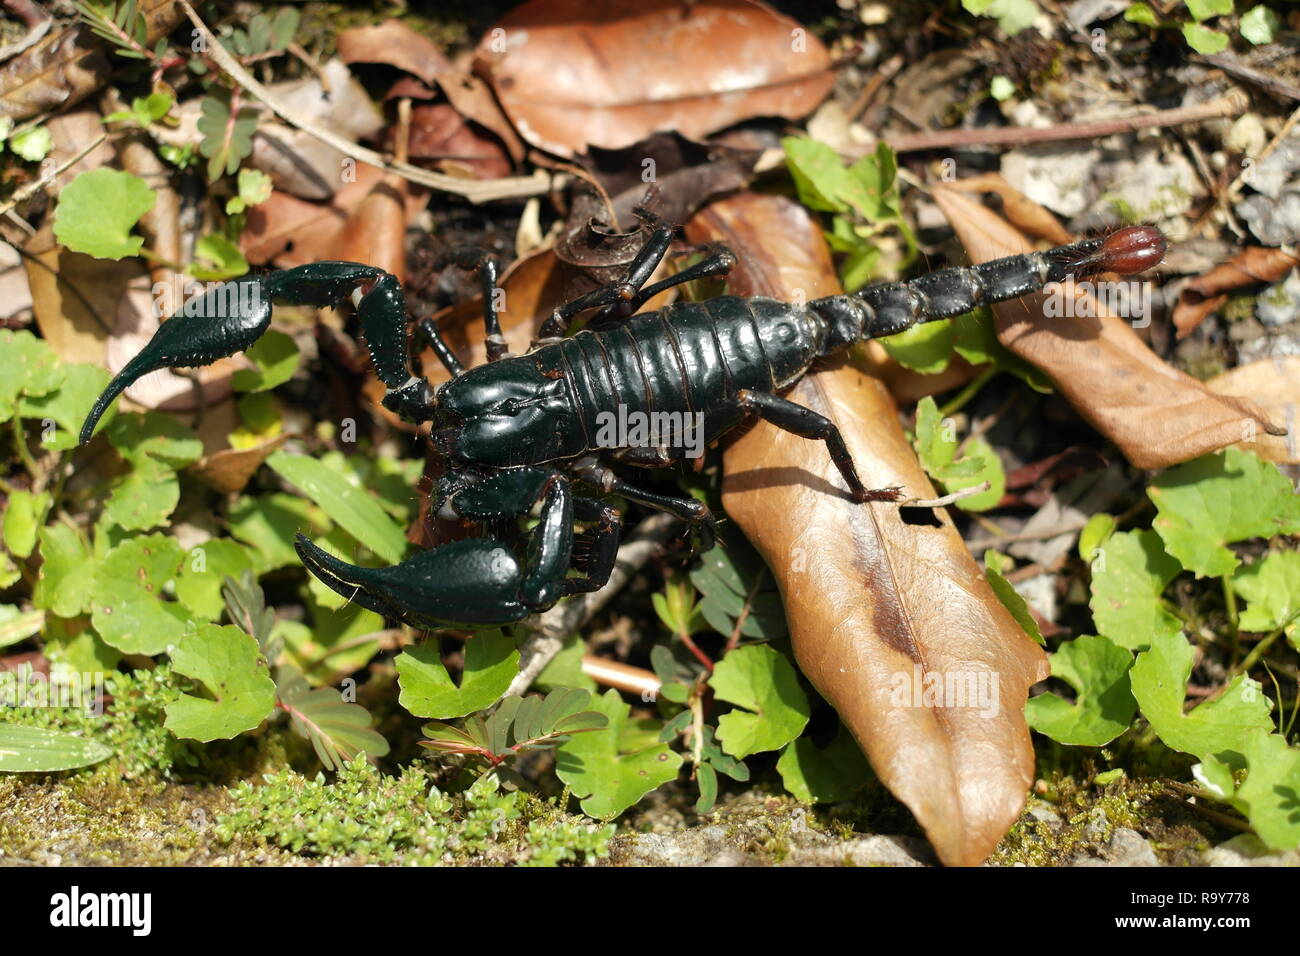 Giant forest scorpion is also known as Giant Blue Scorpion or Malaysia Black scorpion (Heterometrus spinifer) Stock Photo